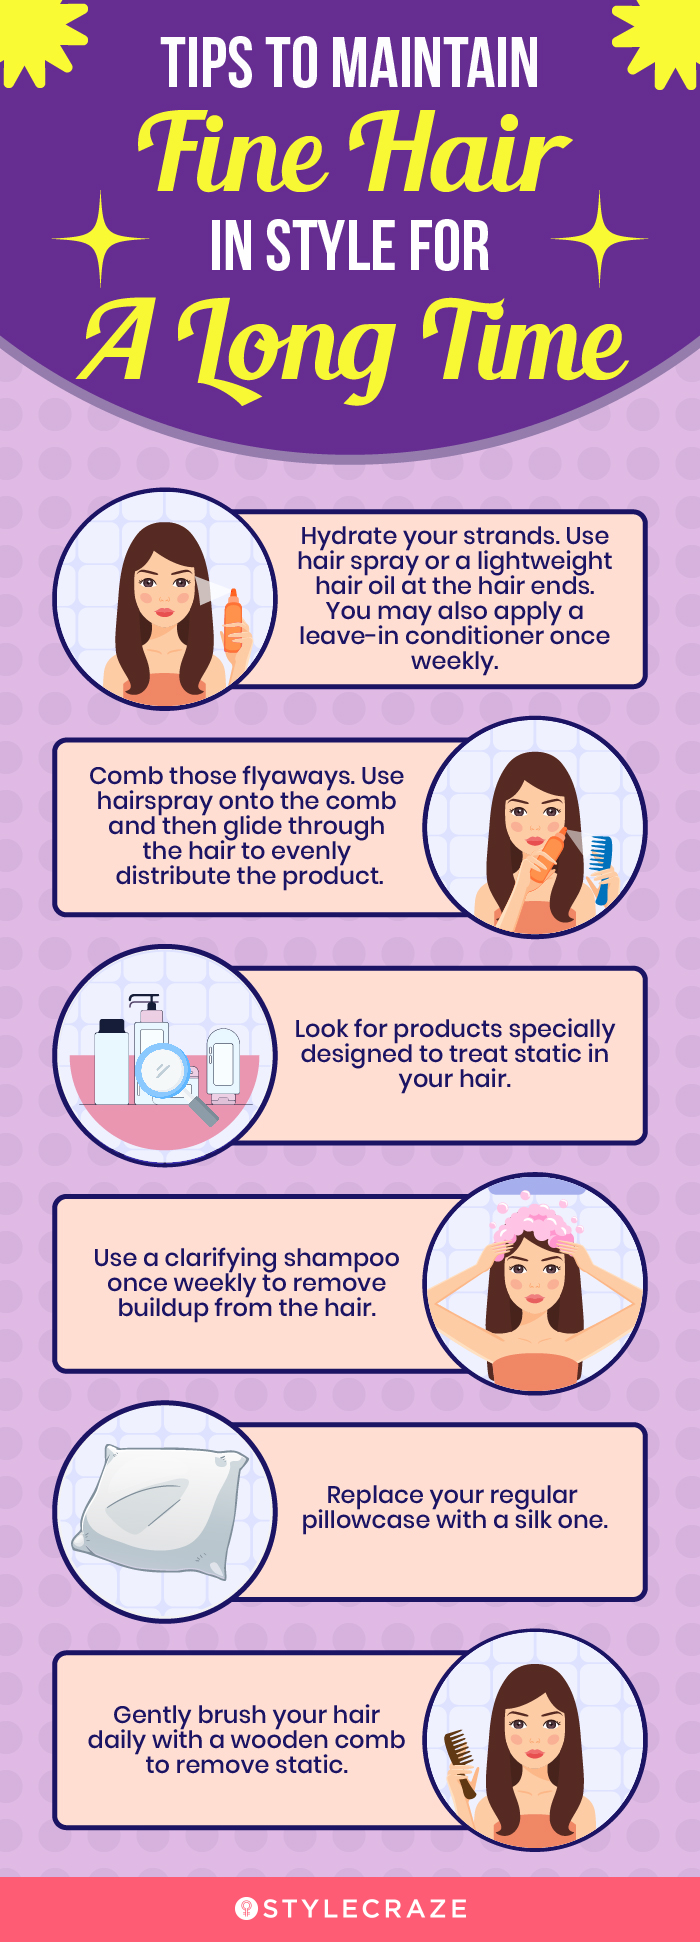 Tips To Maintain Fine Hair In Style For A Long Time (infographic)